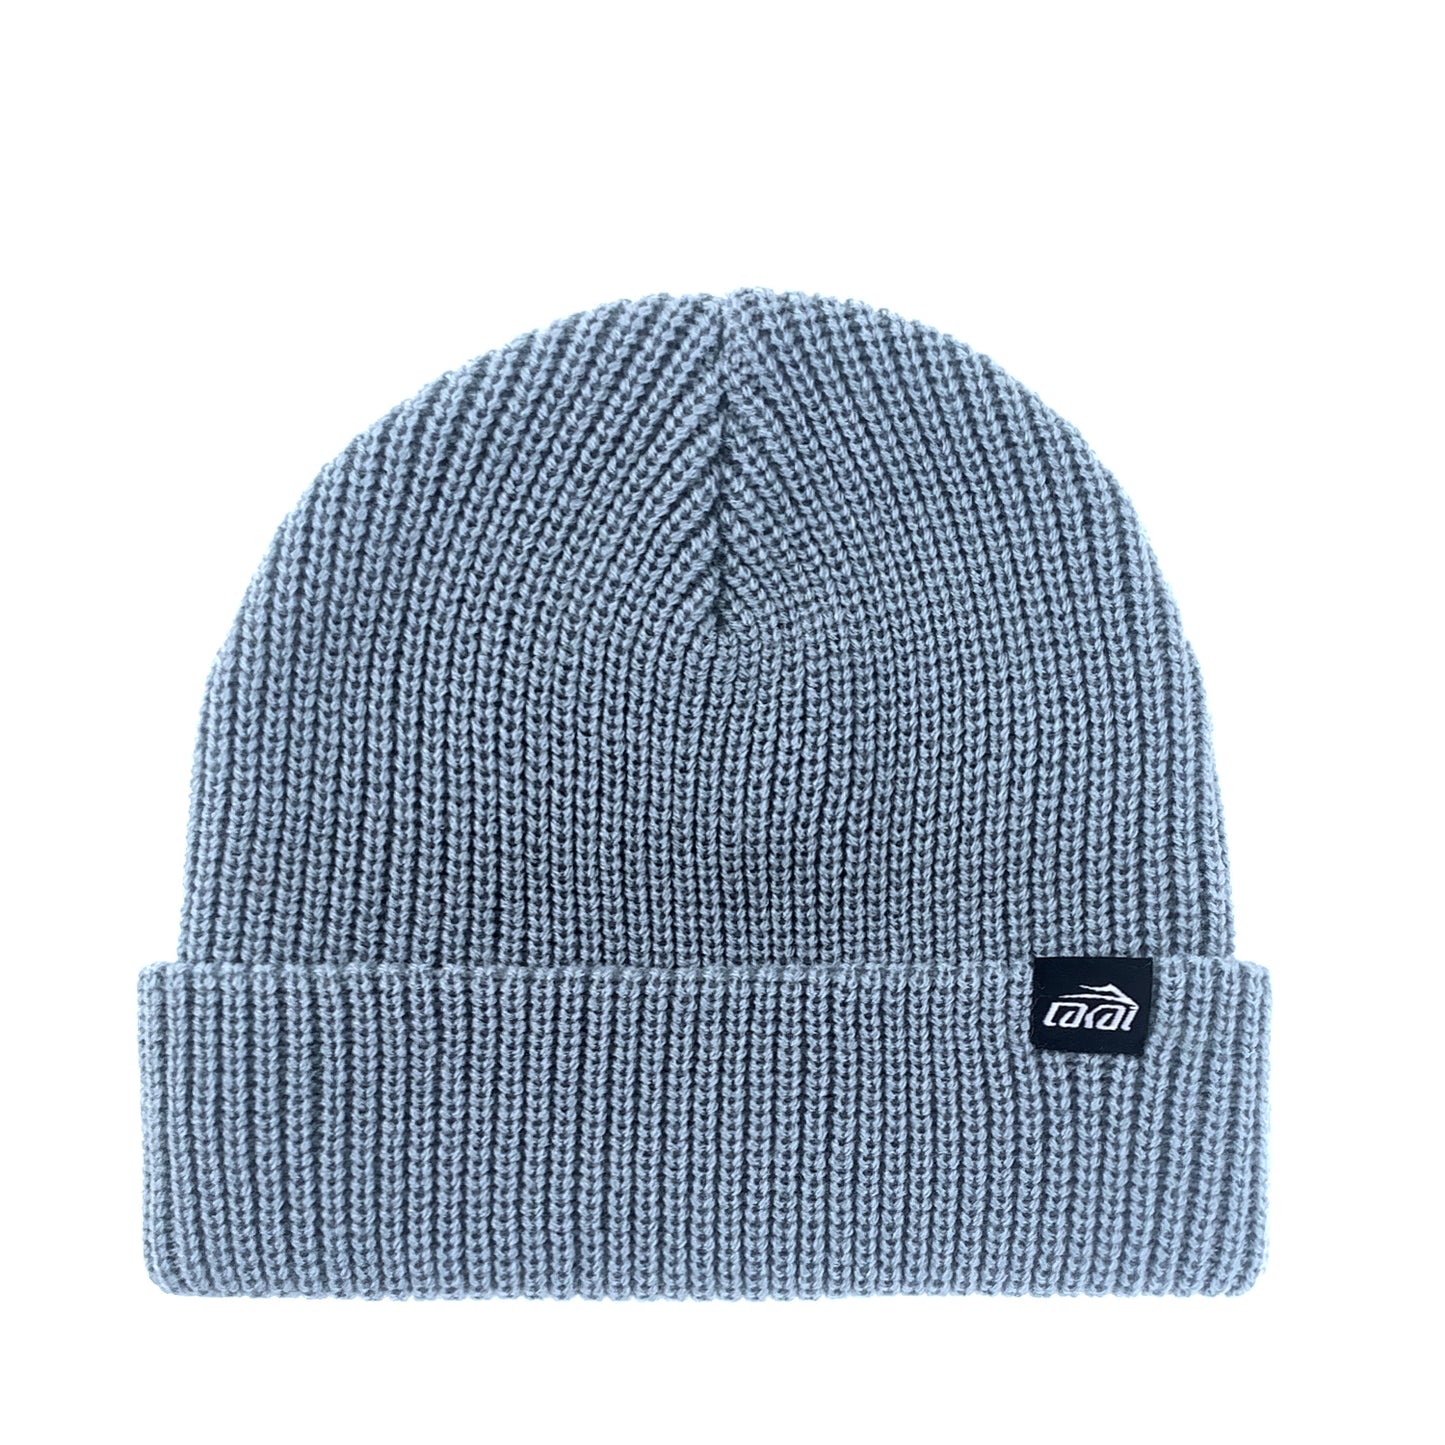 Lakai Watch Beanie - Muted Blue - Prime Delux Store